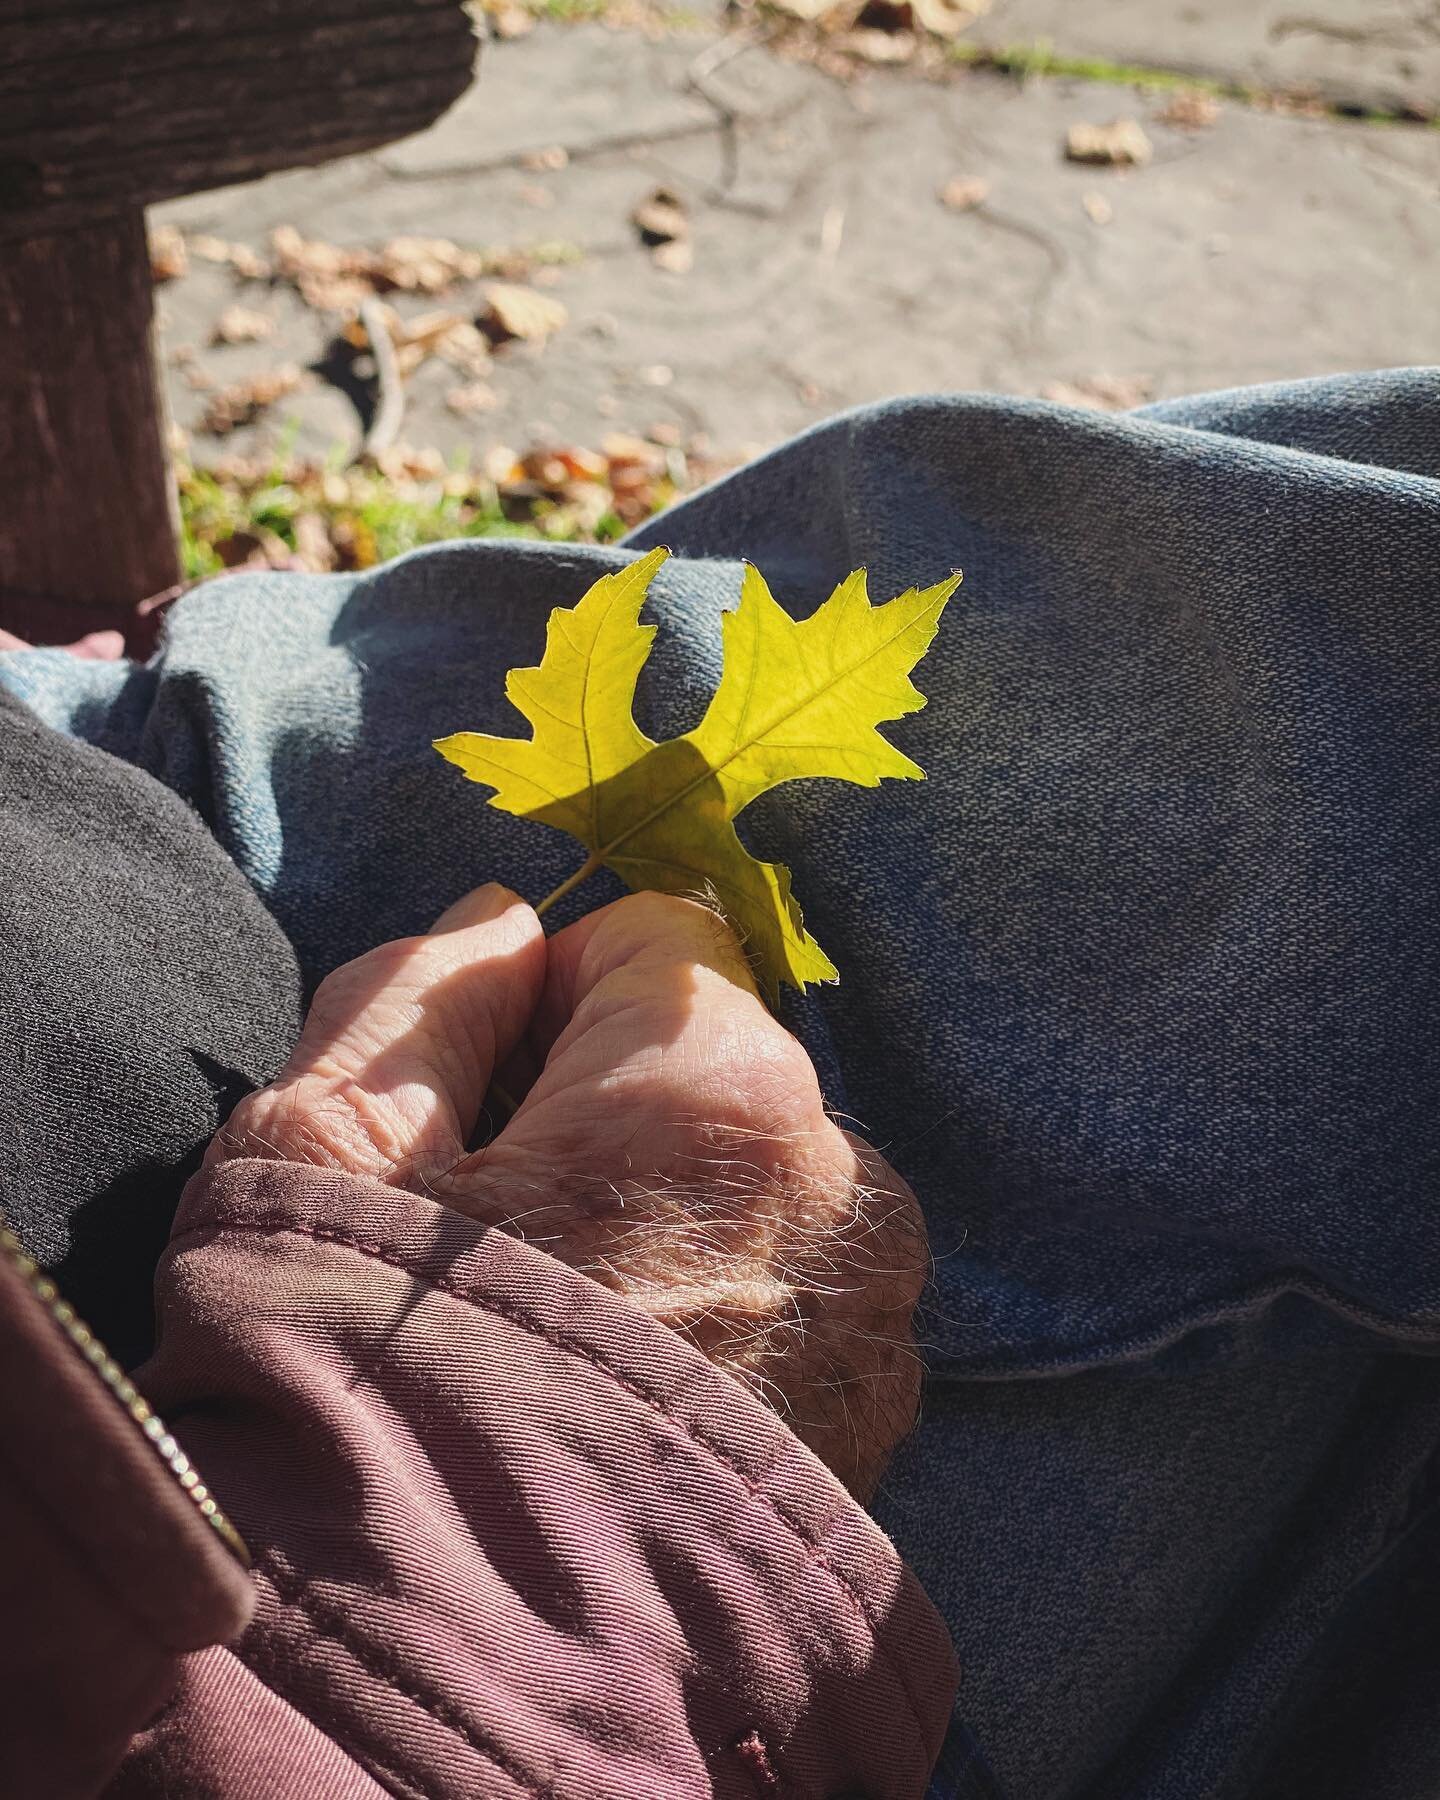 ．
These hands
and the characters they created
and the conversations they animated
．
Missing you, Ralph Lee. 
．
1. A splendid visit with Ralph last fall, collecting leaves and sitting in the sun. 
2. Hecate
3. Miss Donkey and Miss Kitty 
4. Two puppet